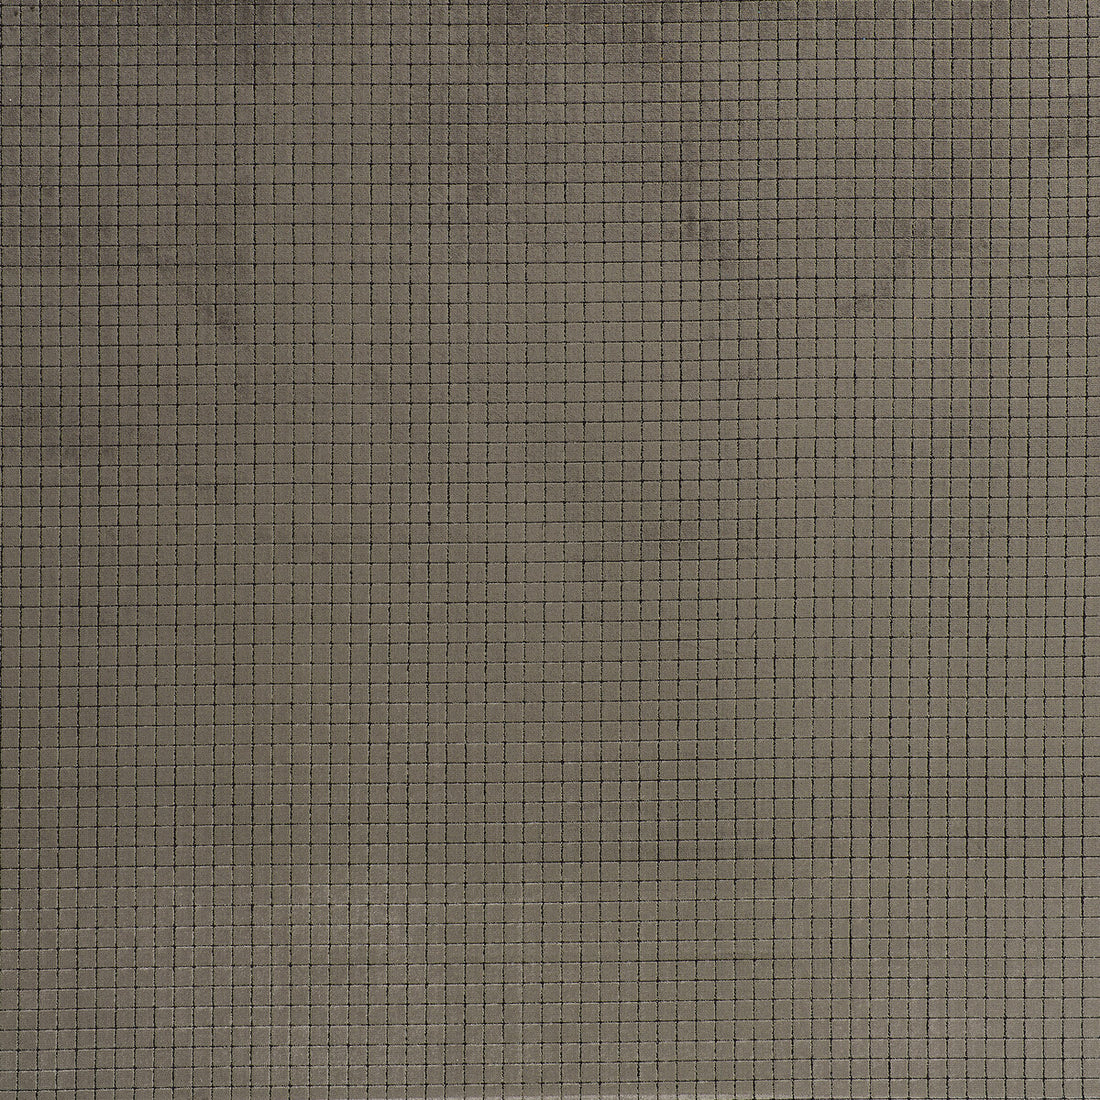 Purcombe Check fabric in slate color - pattern PF50301.940.0 - by Baker Lifestyle in the Denbury collection